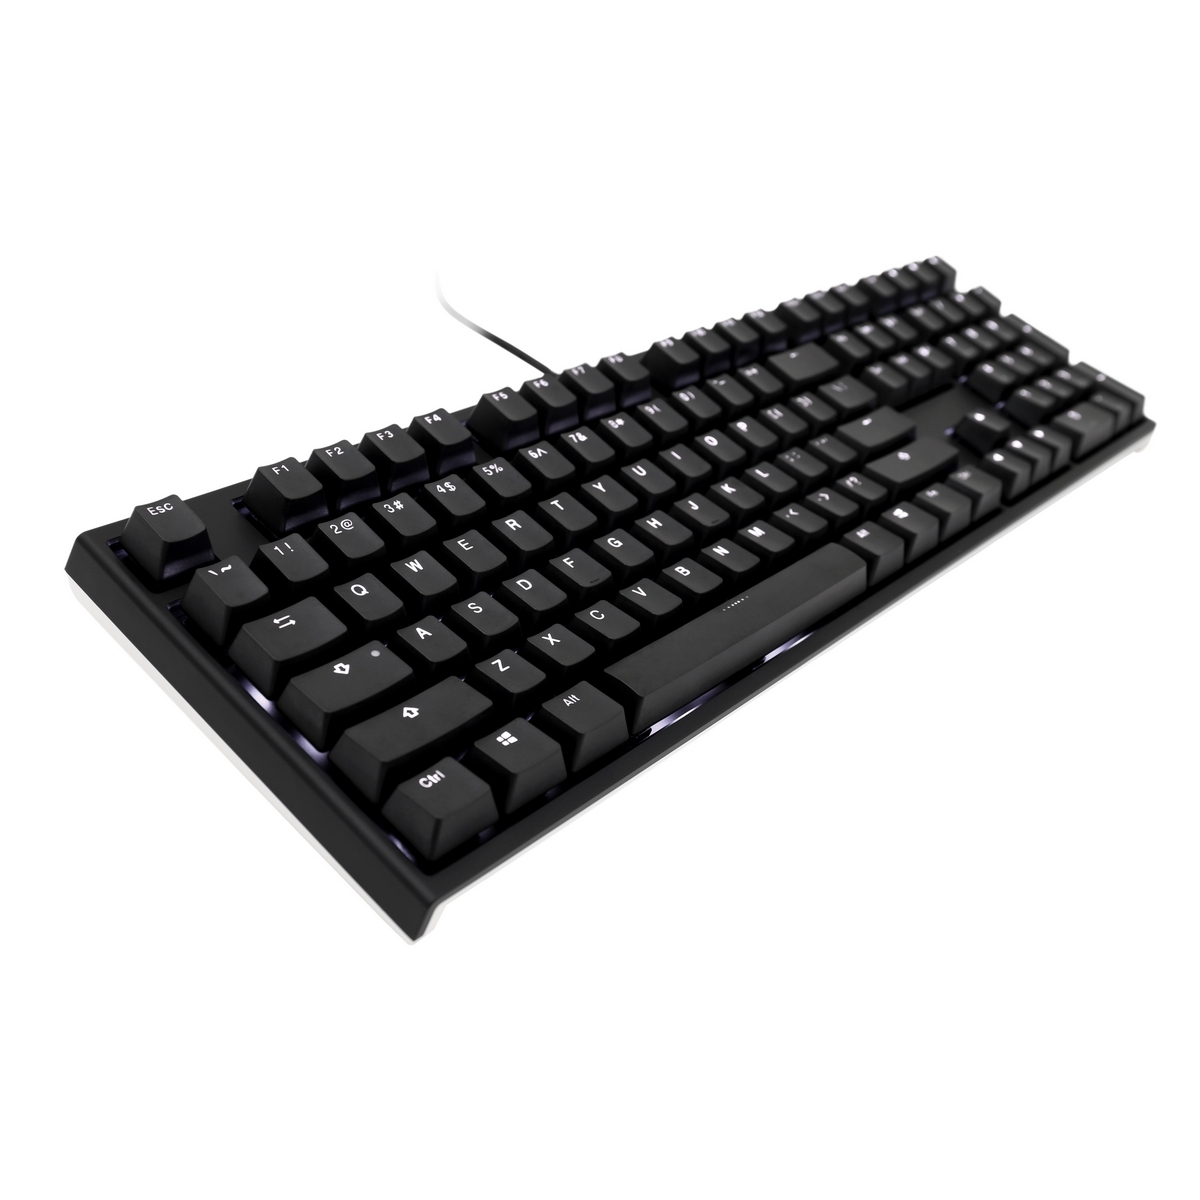 Ducky - Ducky One 2 White Backlit Brown Cherry MX Switch USB Mechanical Gaming Keyboard UK Layout